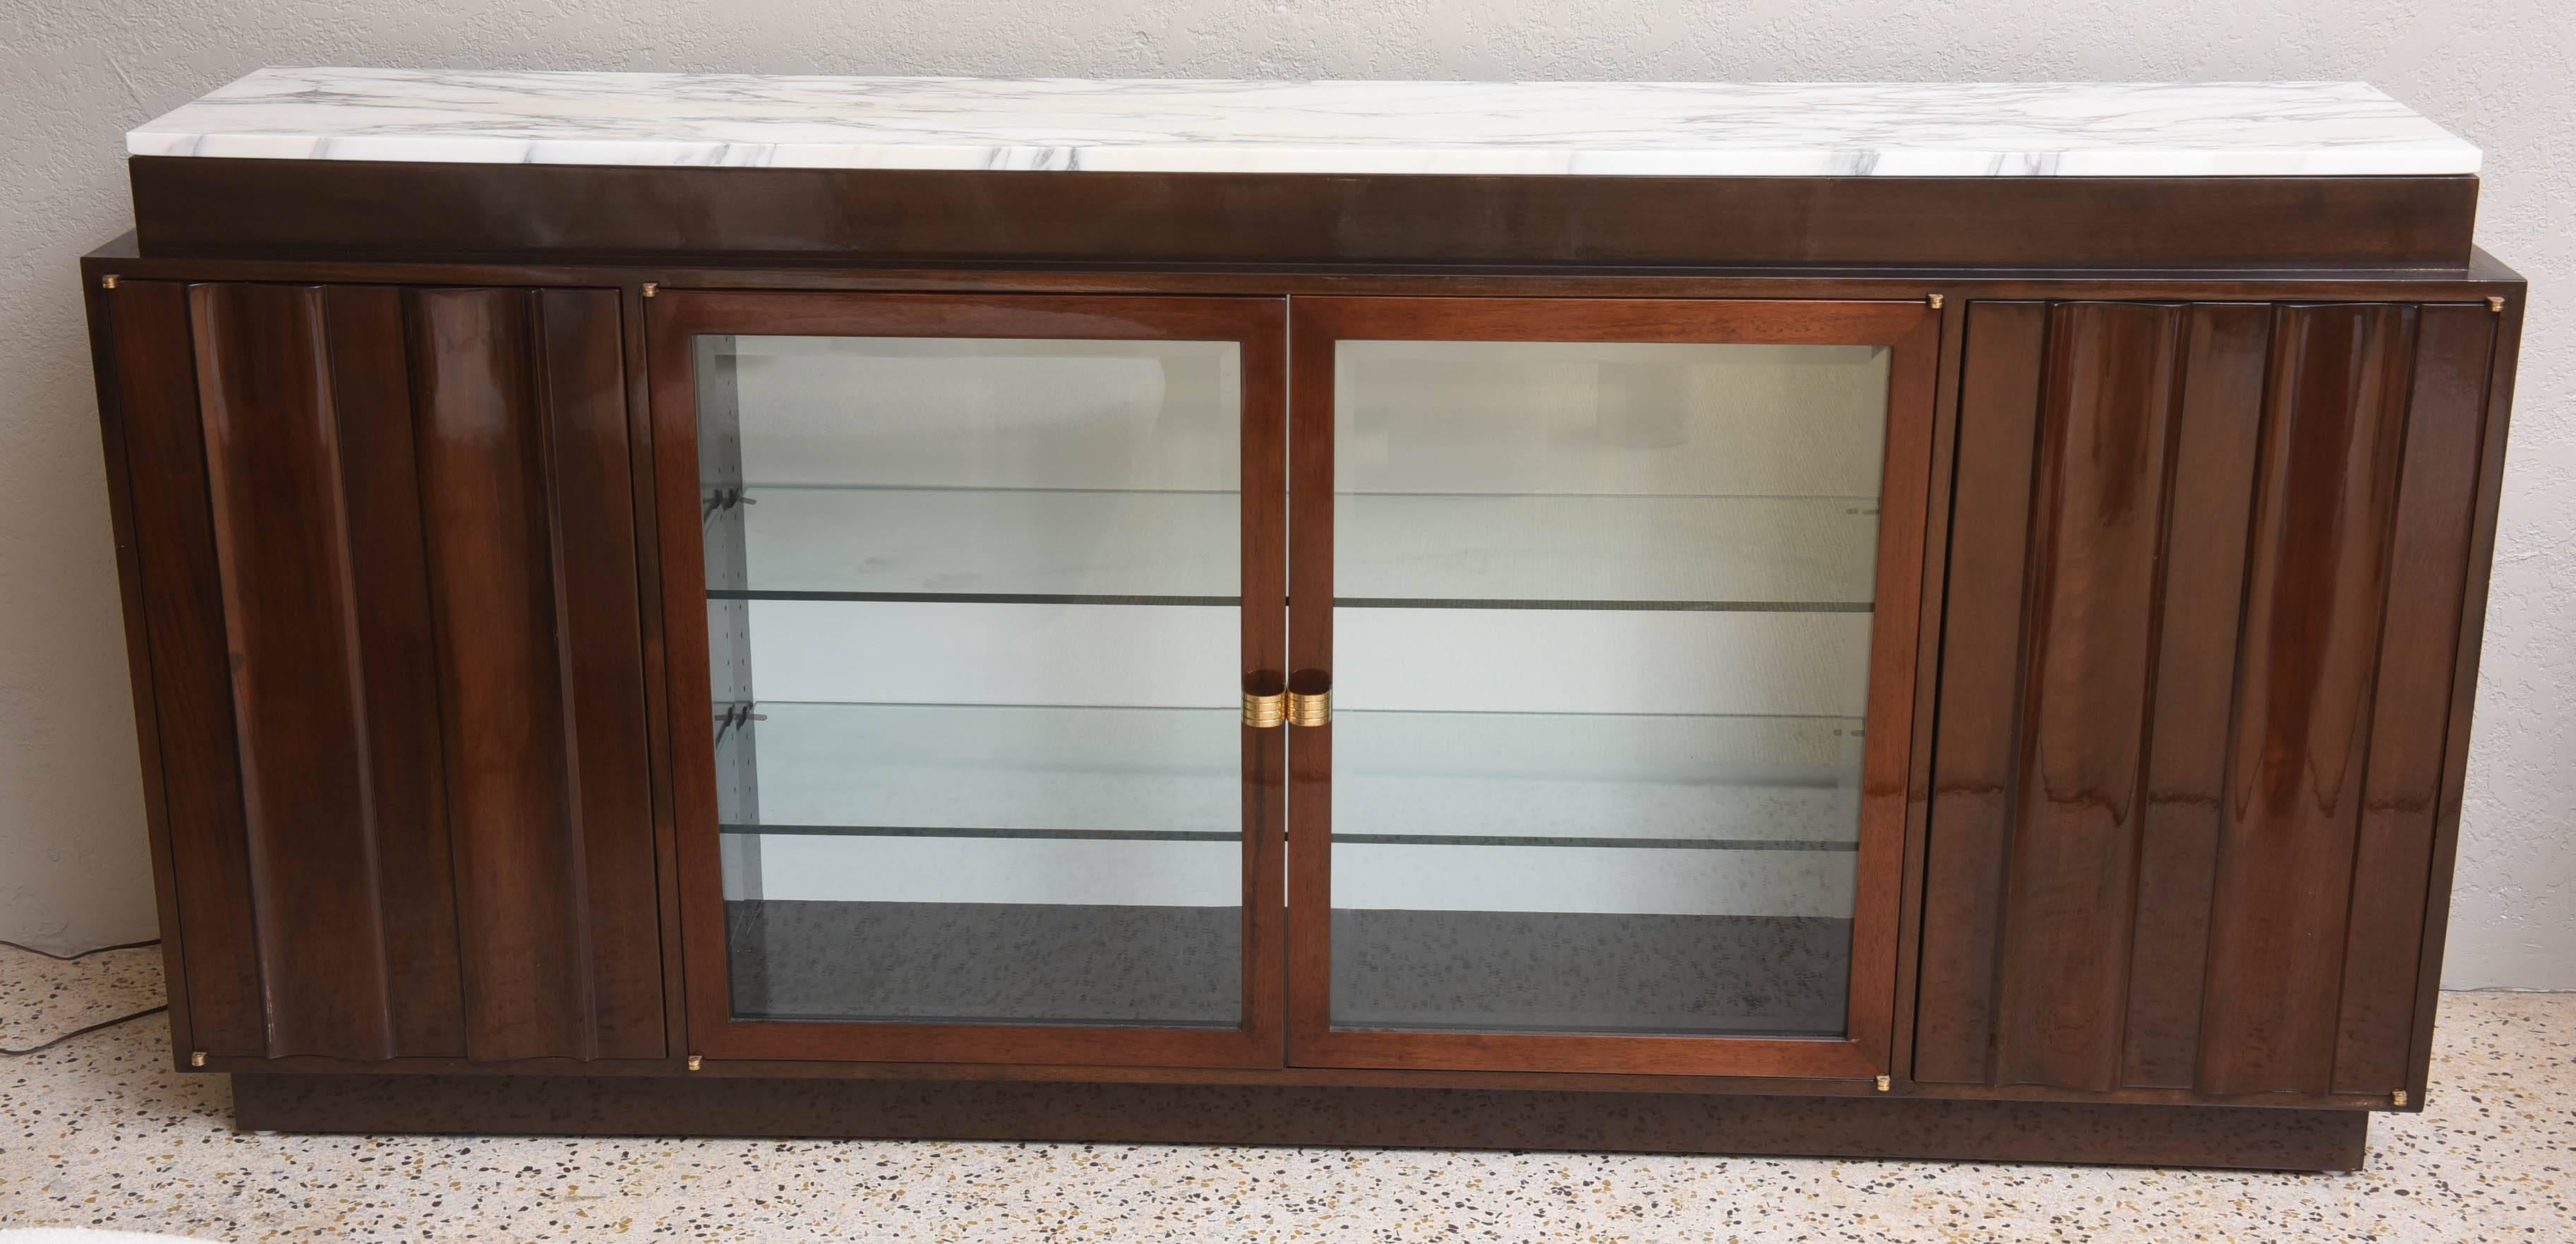 Tall fluted walnut buffet with marble top by Tommi Parzinger. Glazed double-doored lighted section with two glass shelves. Side cabinets with one shelf each and polished solid brass hardware. Part of a two-piece South Florida commission.